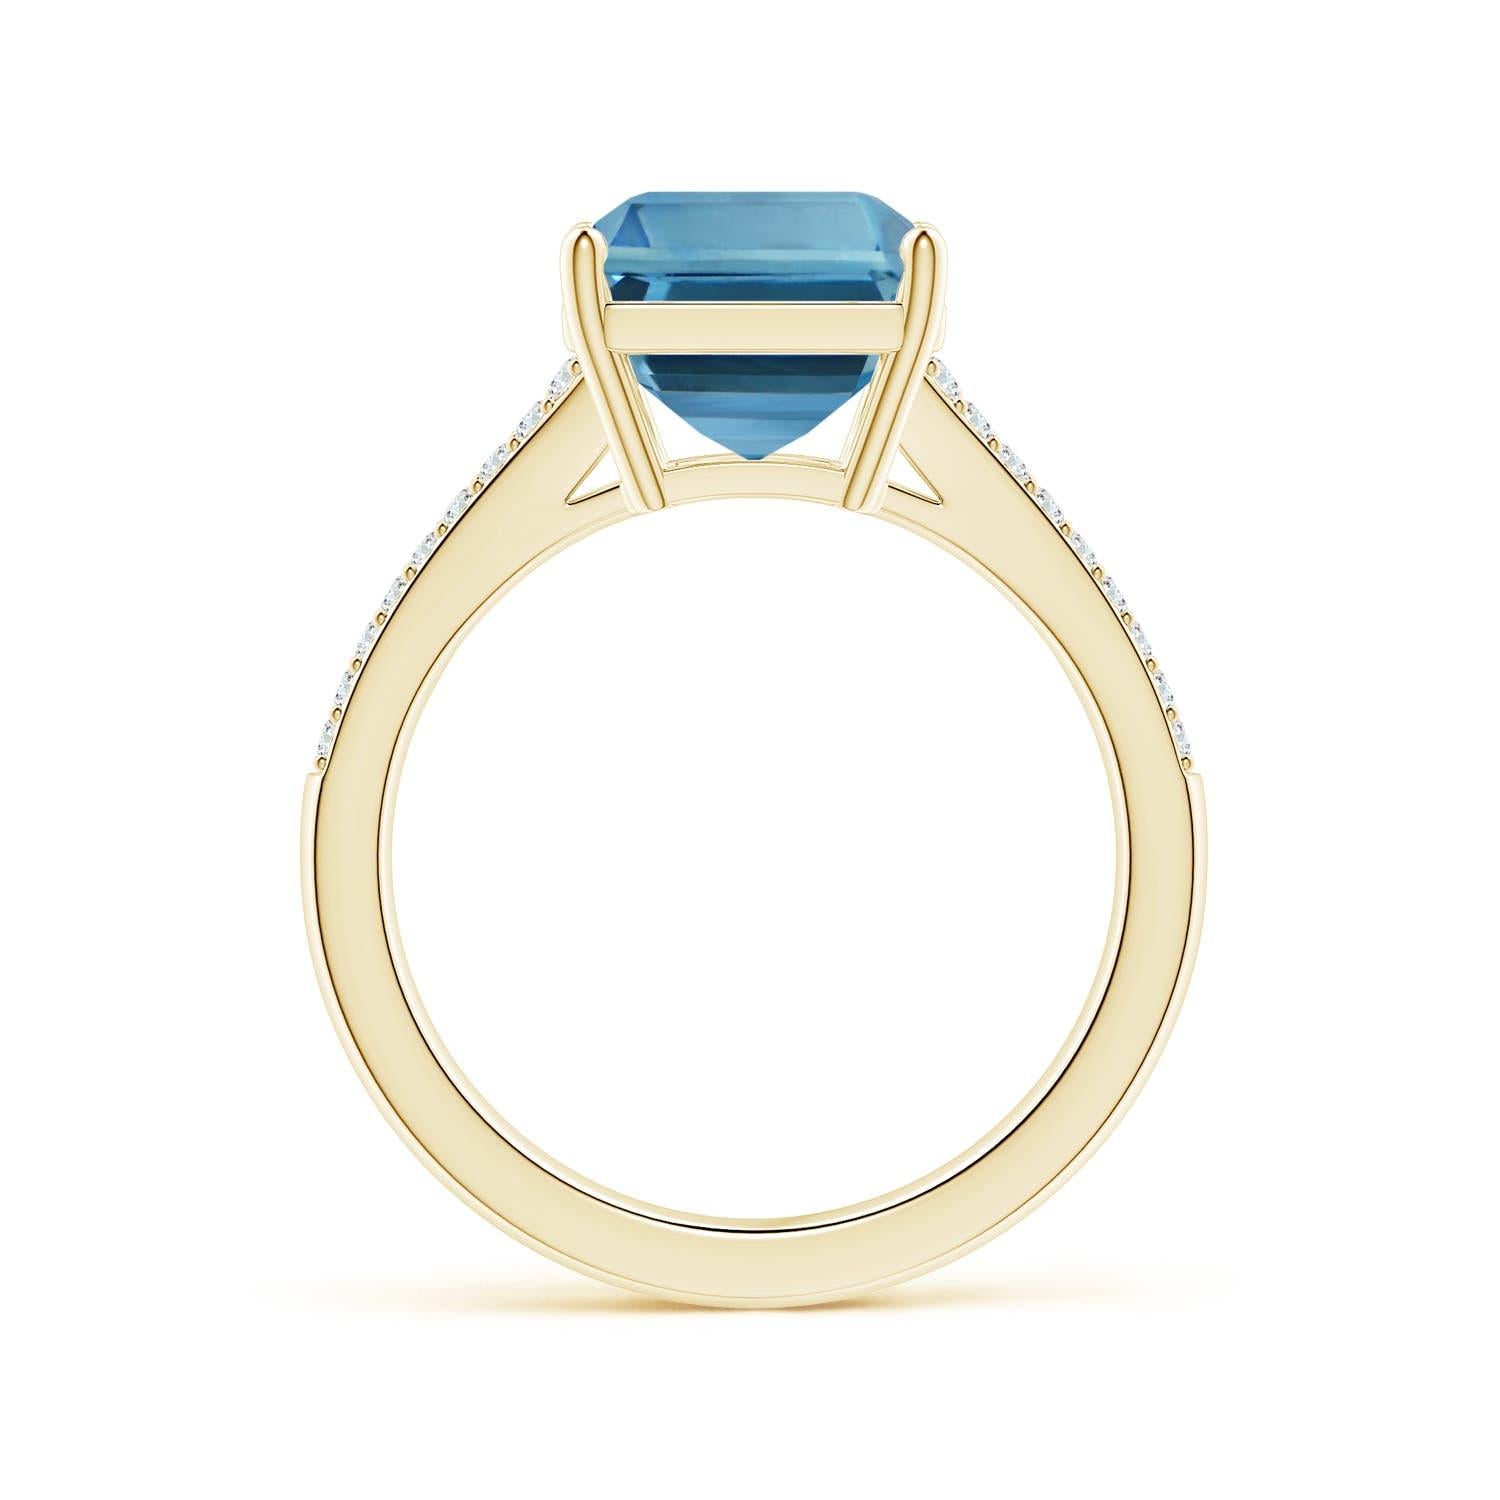 For Sale:  ANGARA GIA Certified 5.04ct Aquamarine Ring in 18K Yellow Gold with Diamond 3